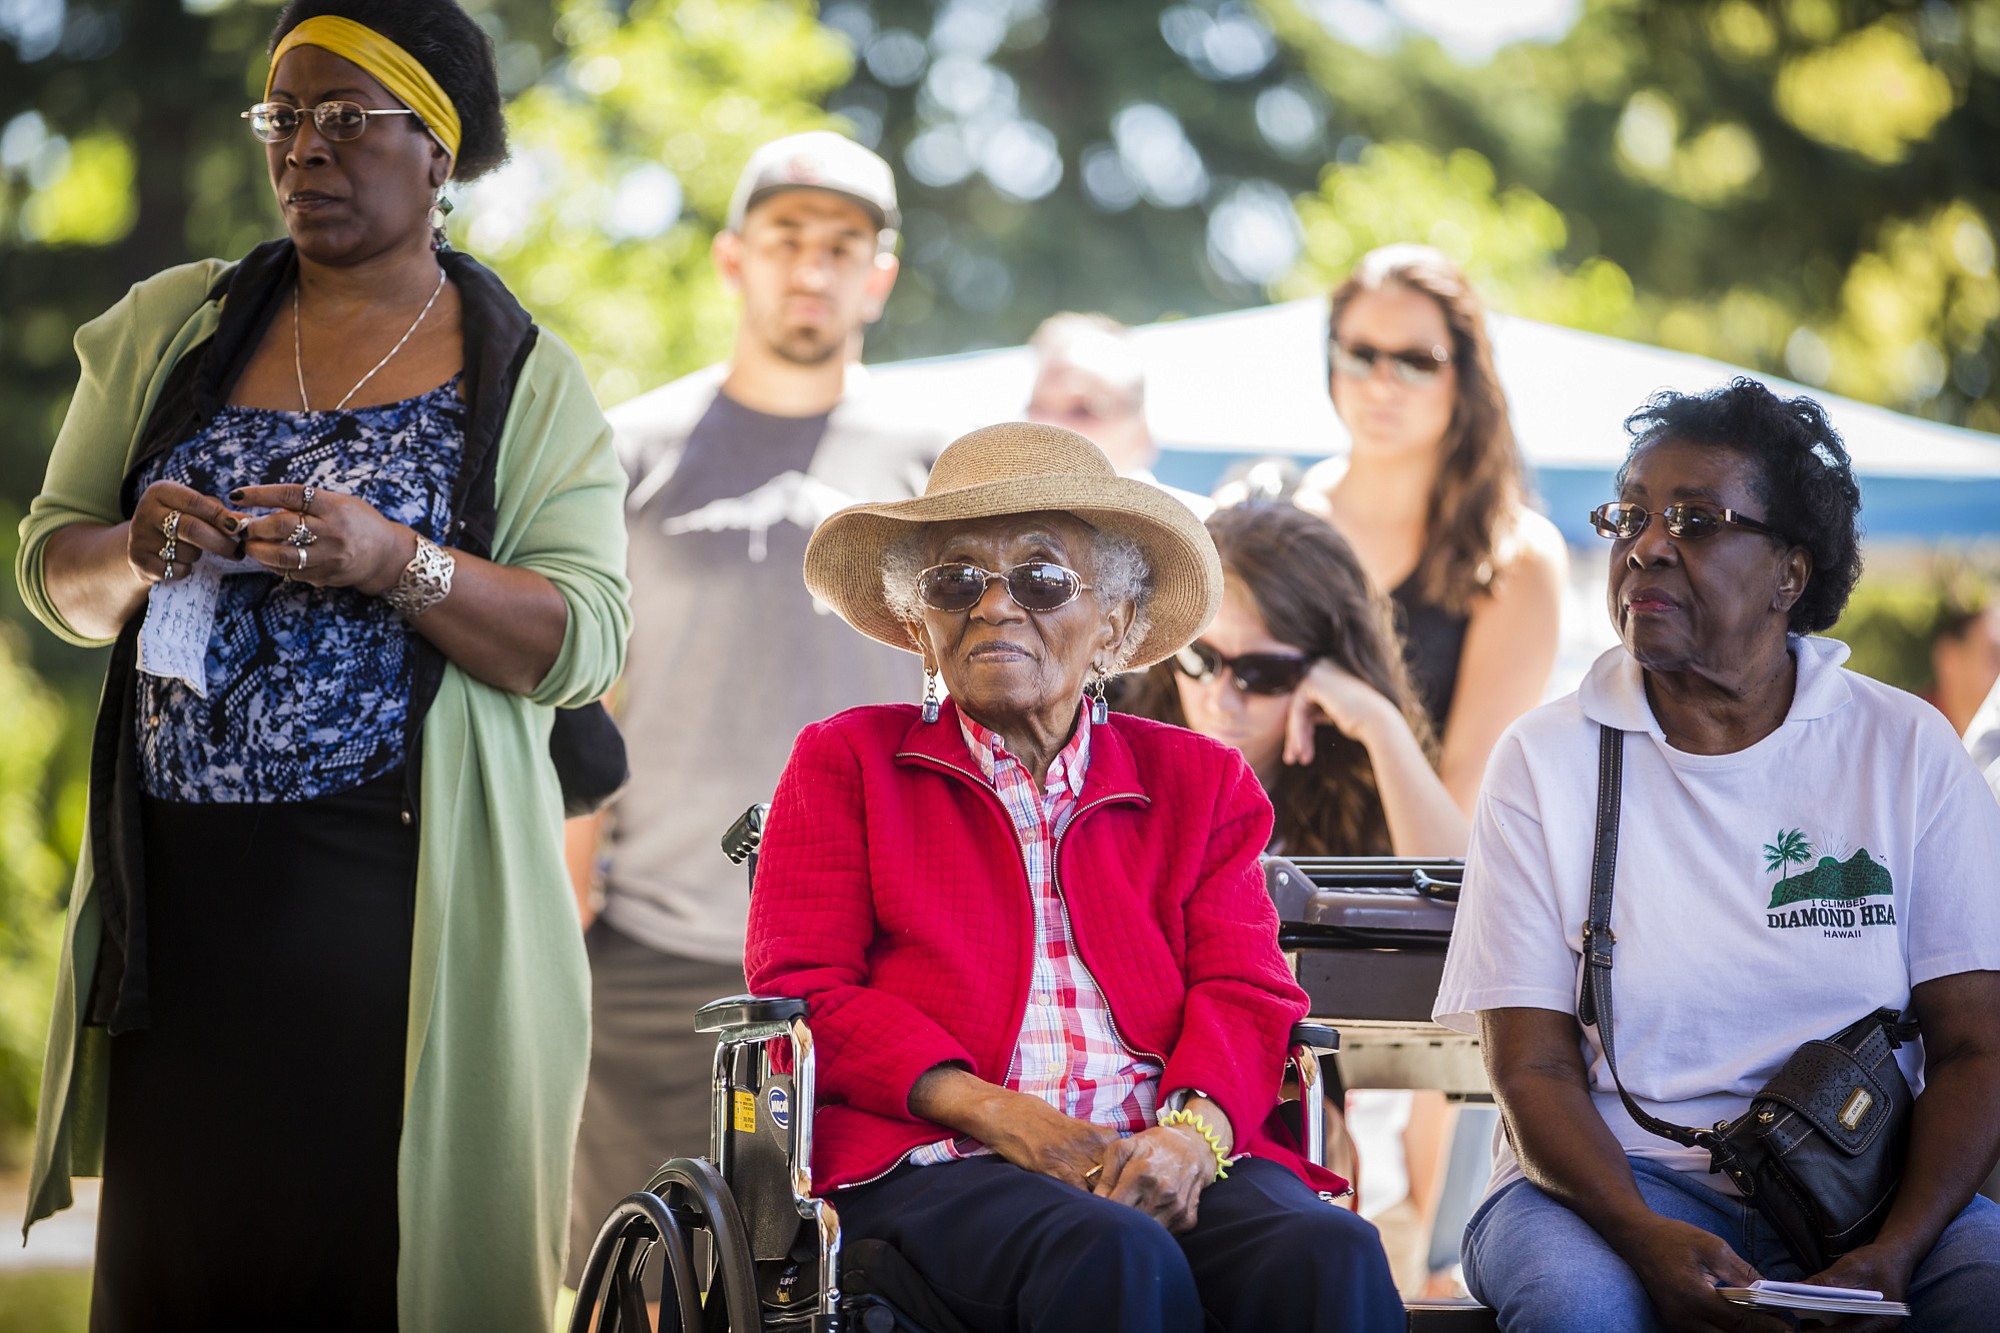 Bertha Baugh, who has been a member of the Vancouver branch of the NAACP since 1942, attends the Juneteenth event at Marshall Community Park Saturday.